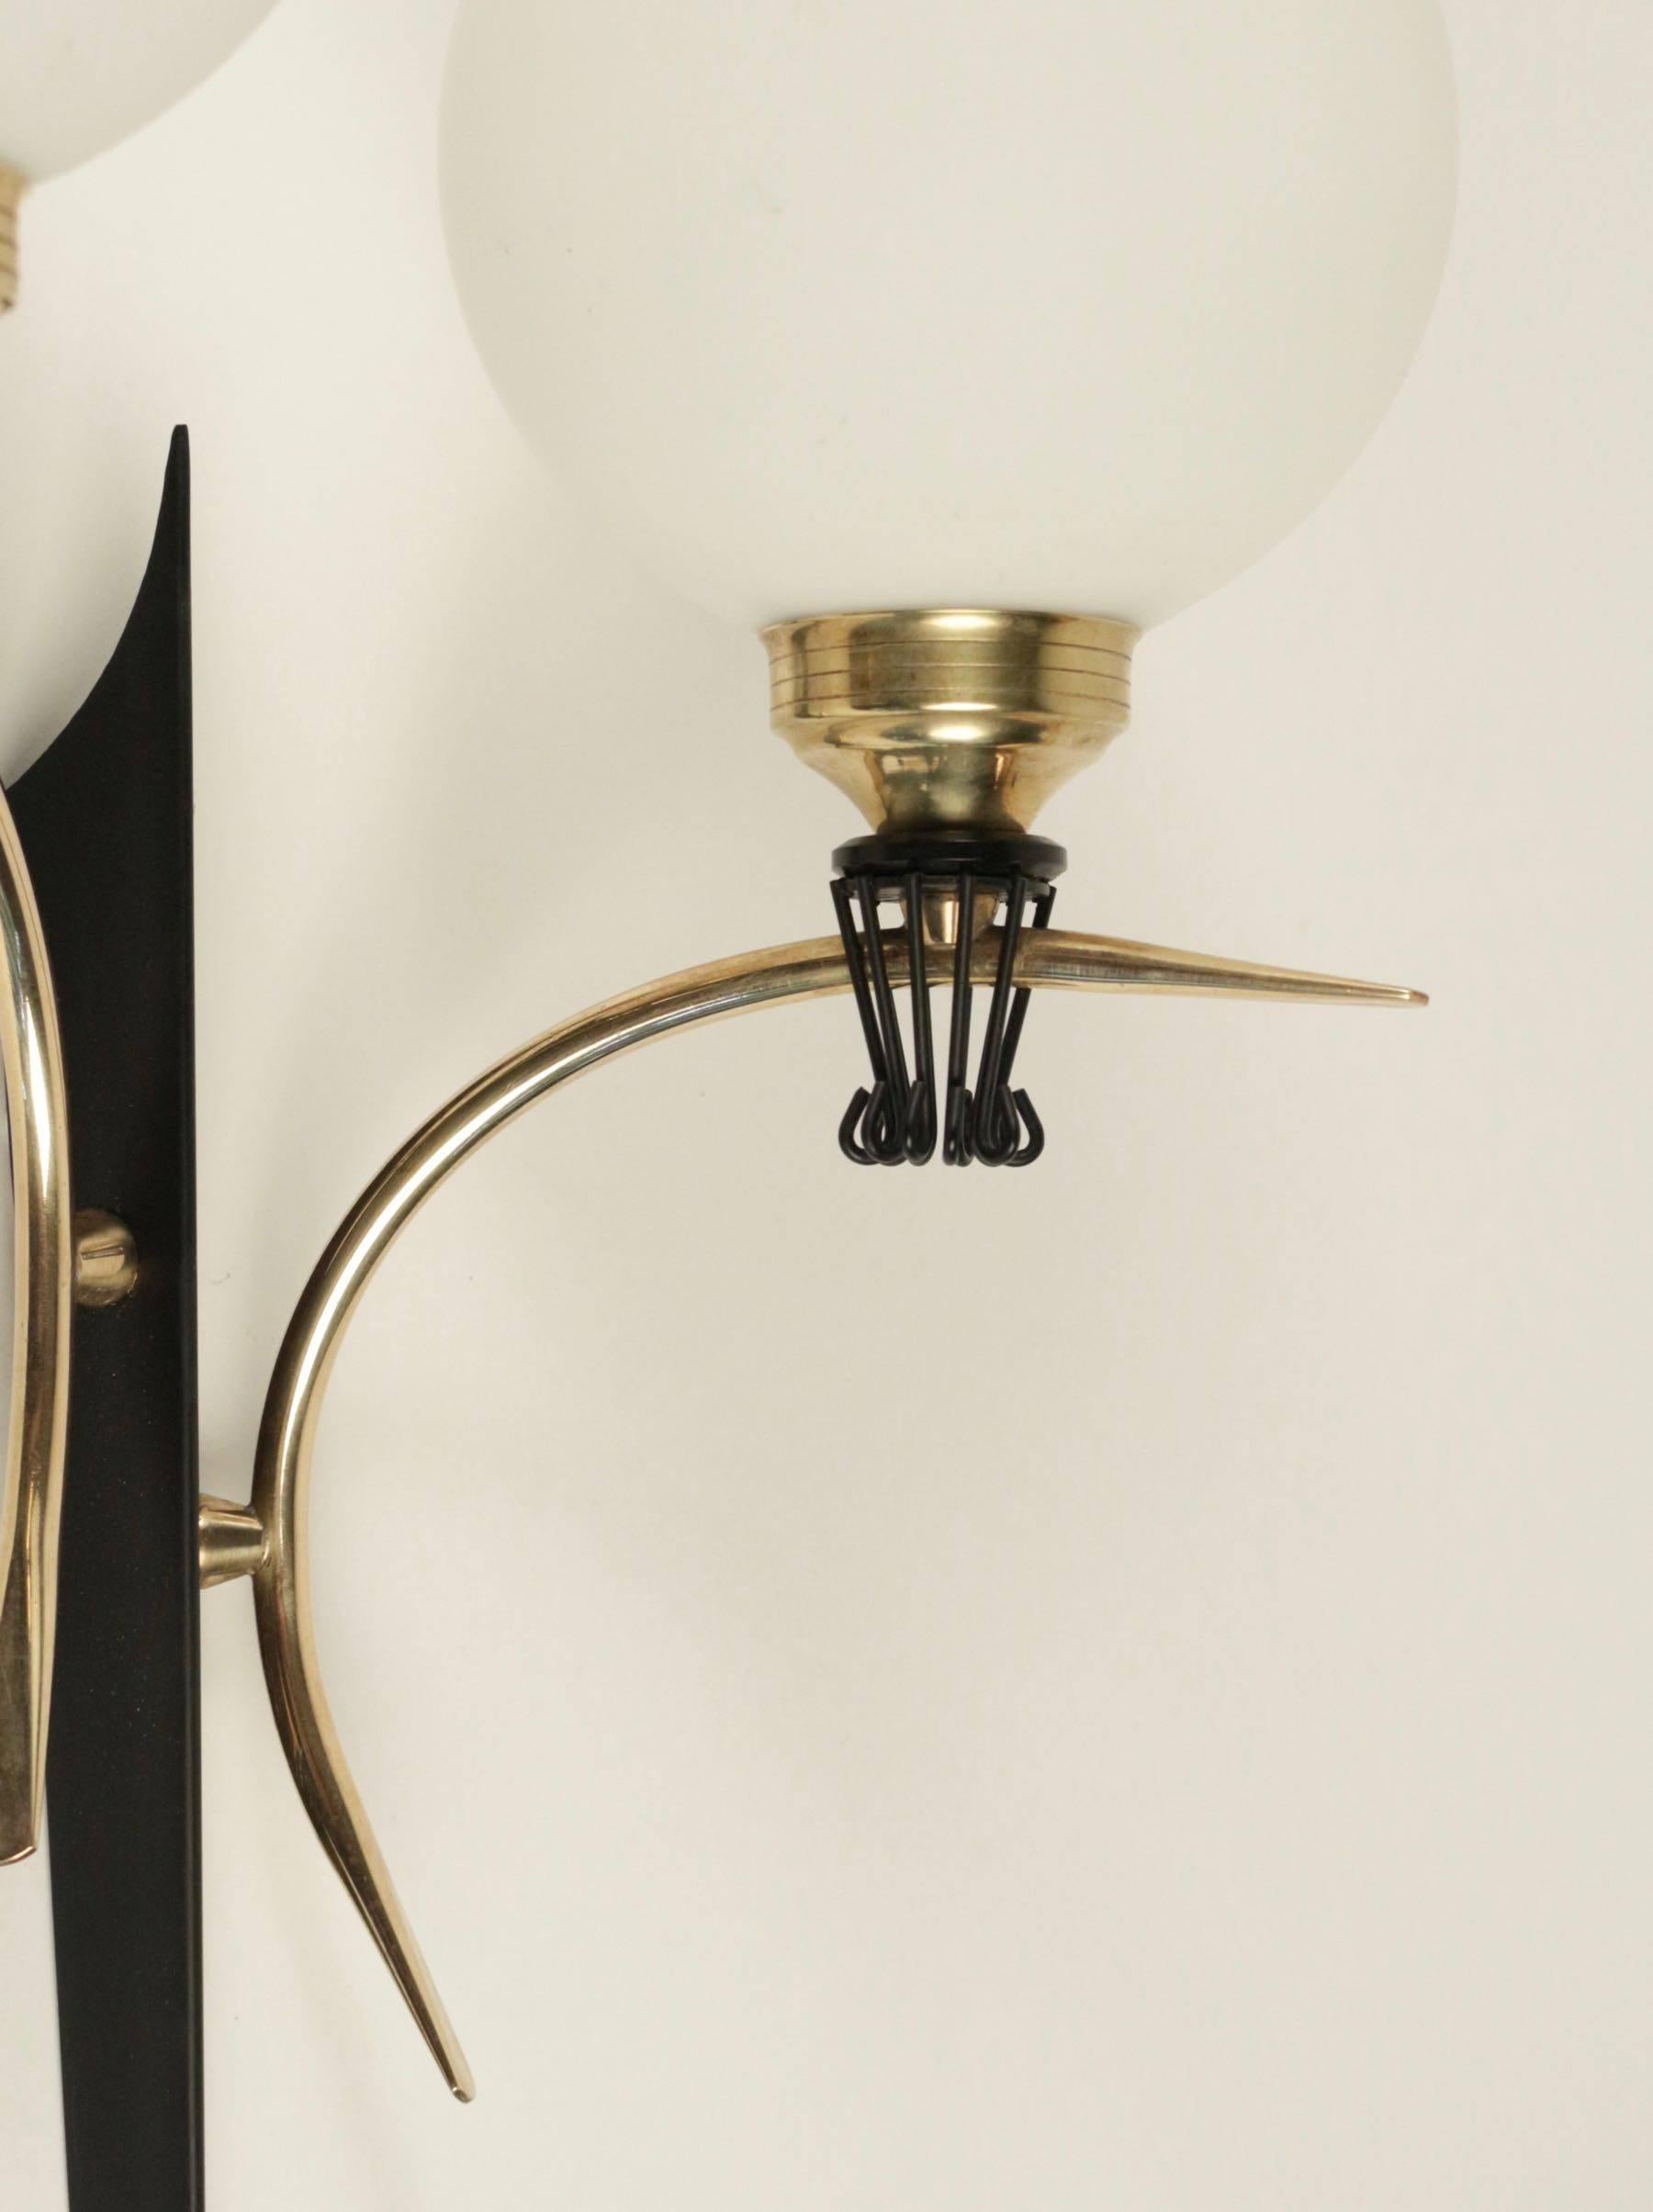 Large pair of sconce Maison Stilnovo Style, 1950.

The black lacquered back plate supports two curved brass arms. Two round opaline glass lampshades are highlighted by black collar and brass bulbs sockets.

Two bulbs per sconce.